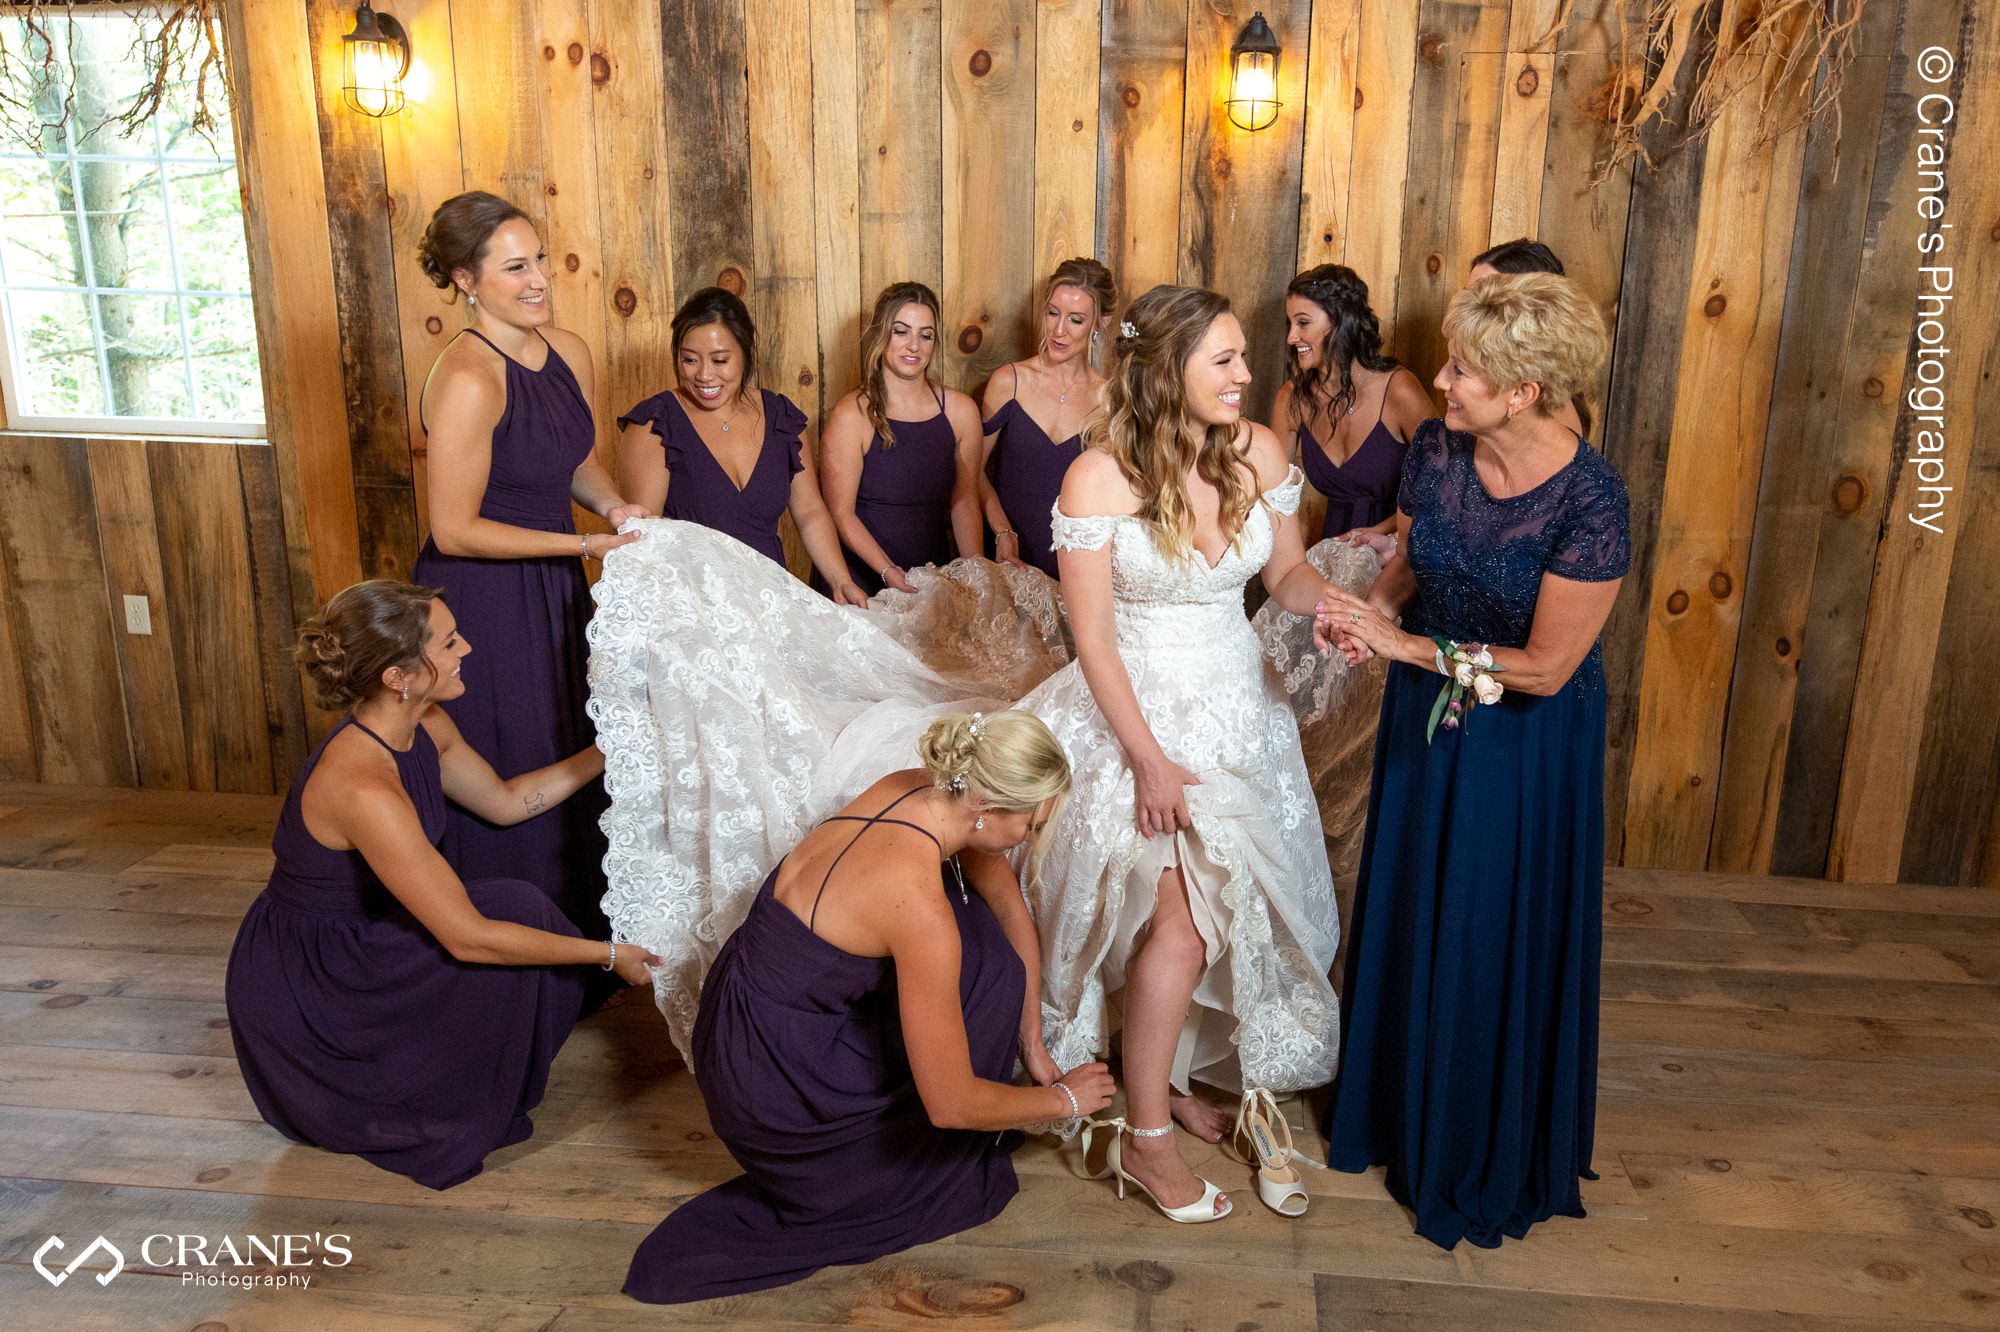 A bride is getting ready with her bridesmaids inside a barn